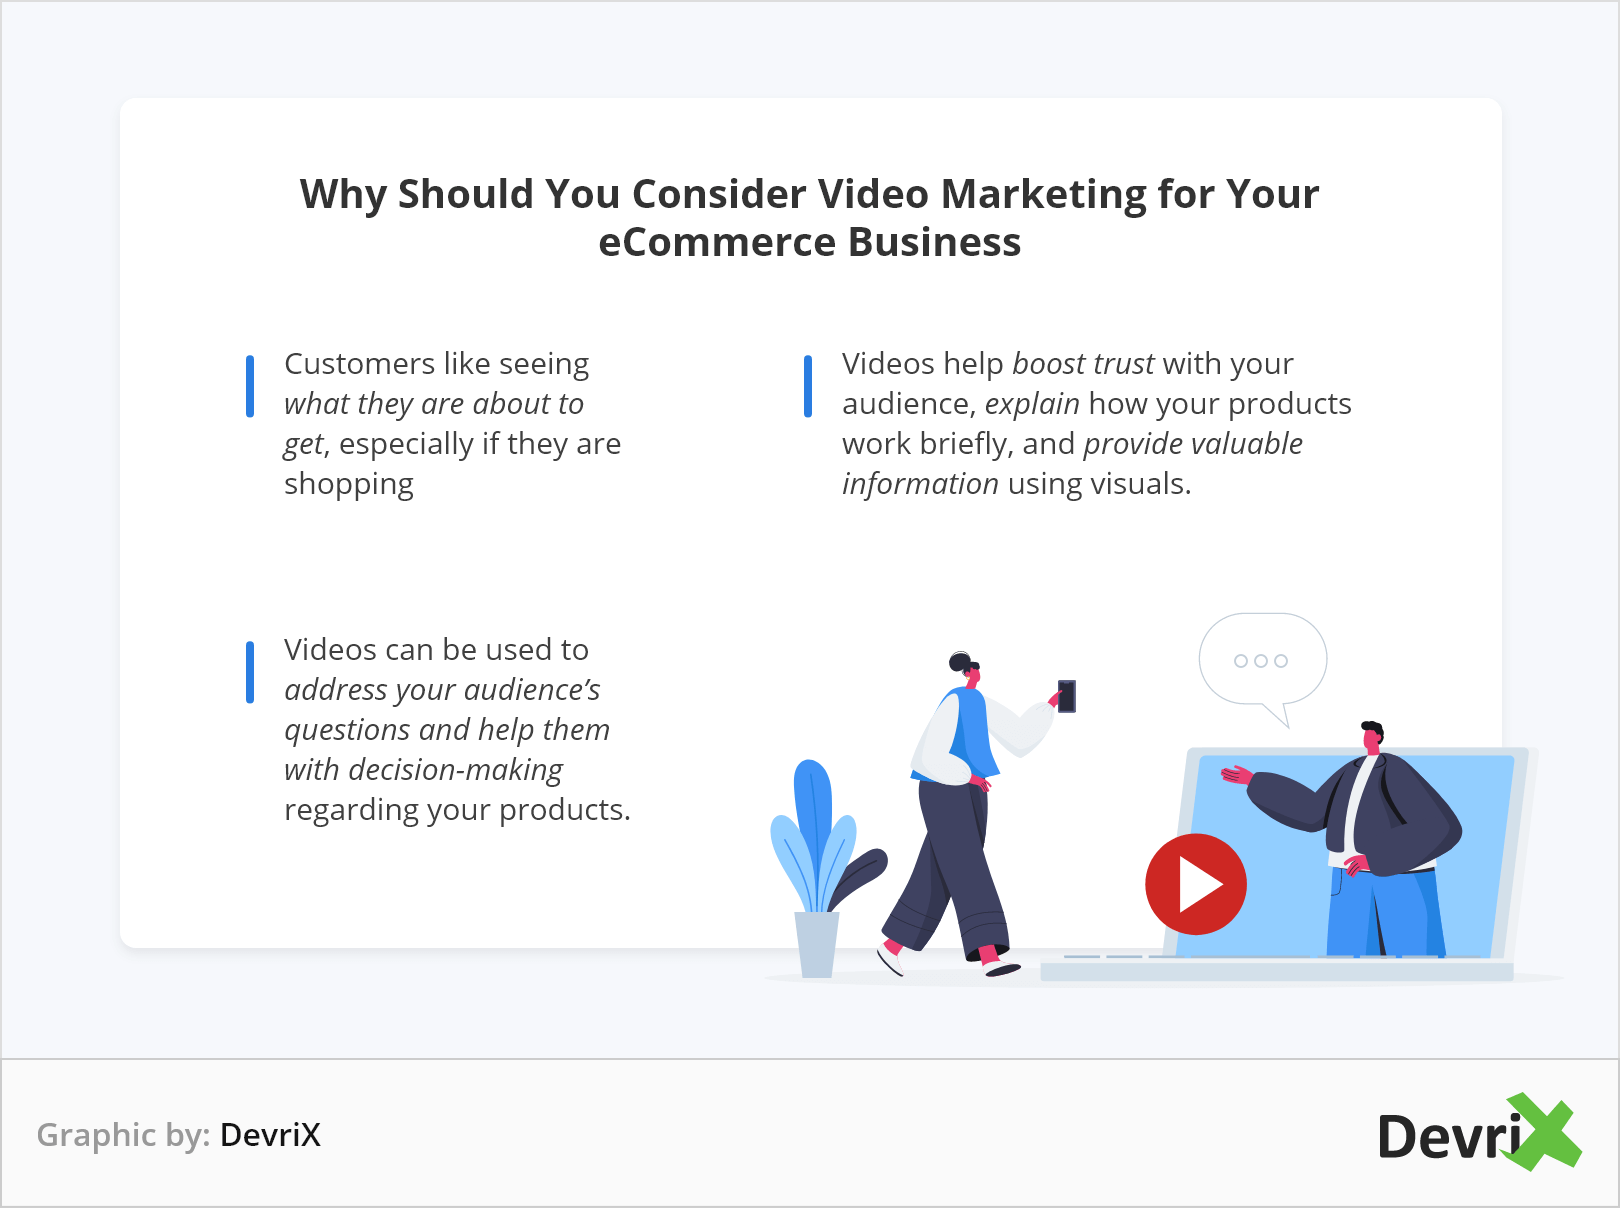 Why should you consider video marketing for your eCommerce business